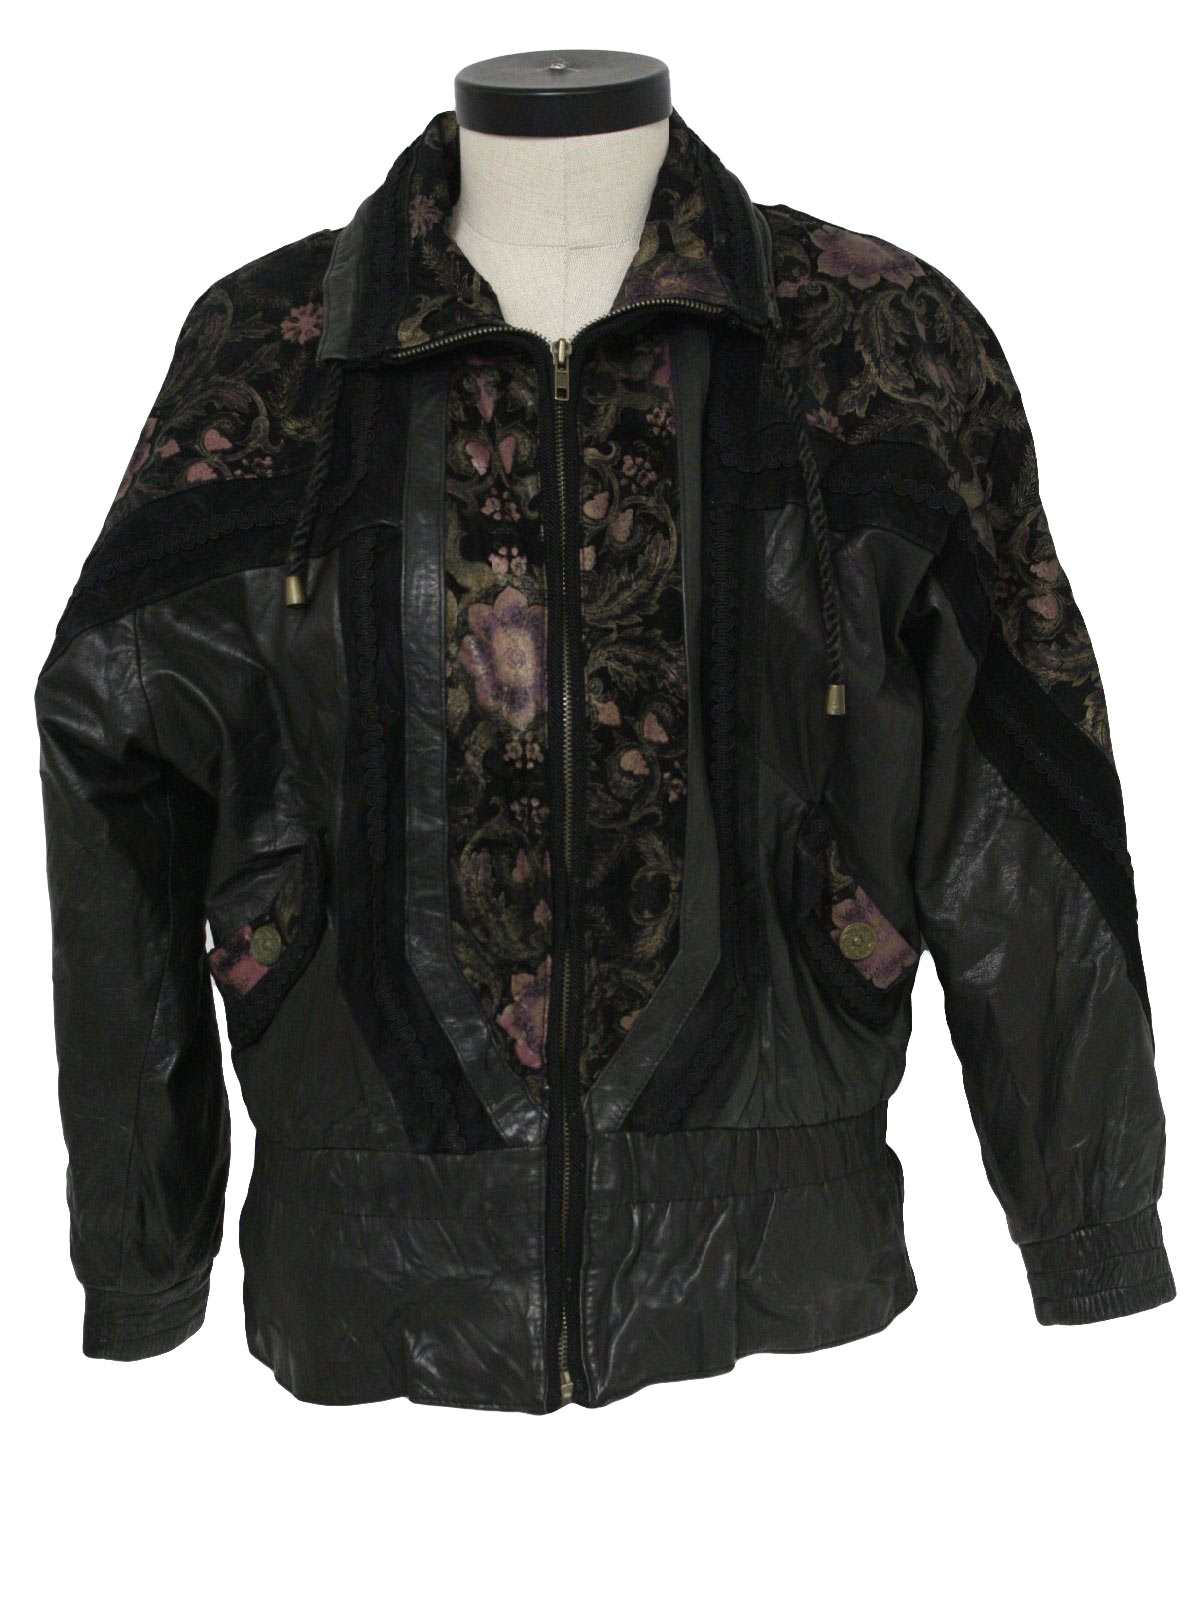 Retro 80's Leather Jacket: 80s -Jay Jacobs- Womens black, gold and ...